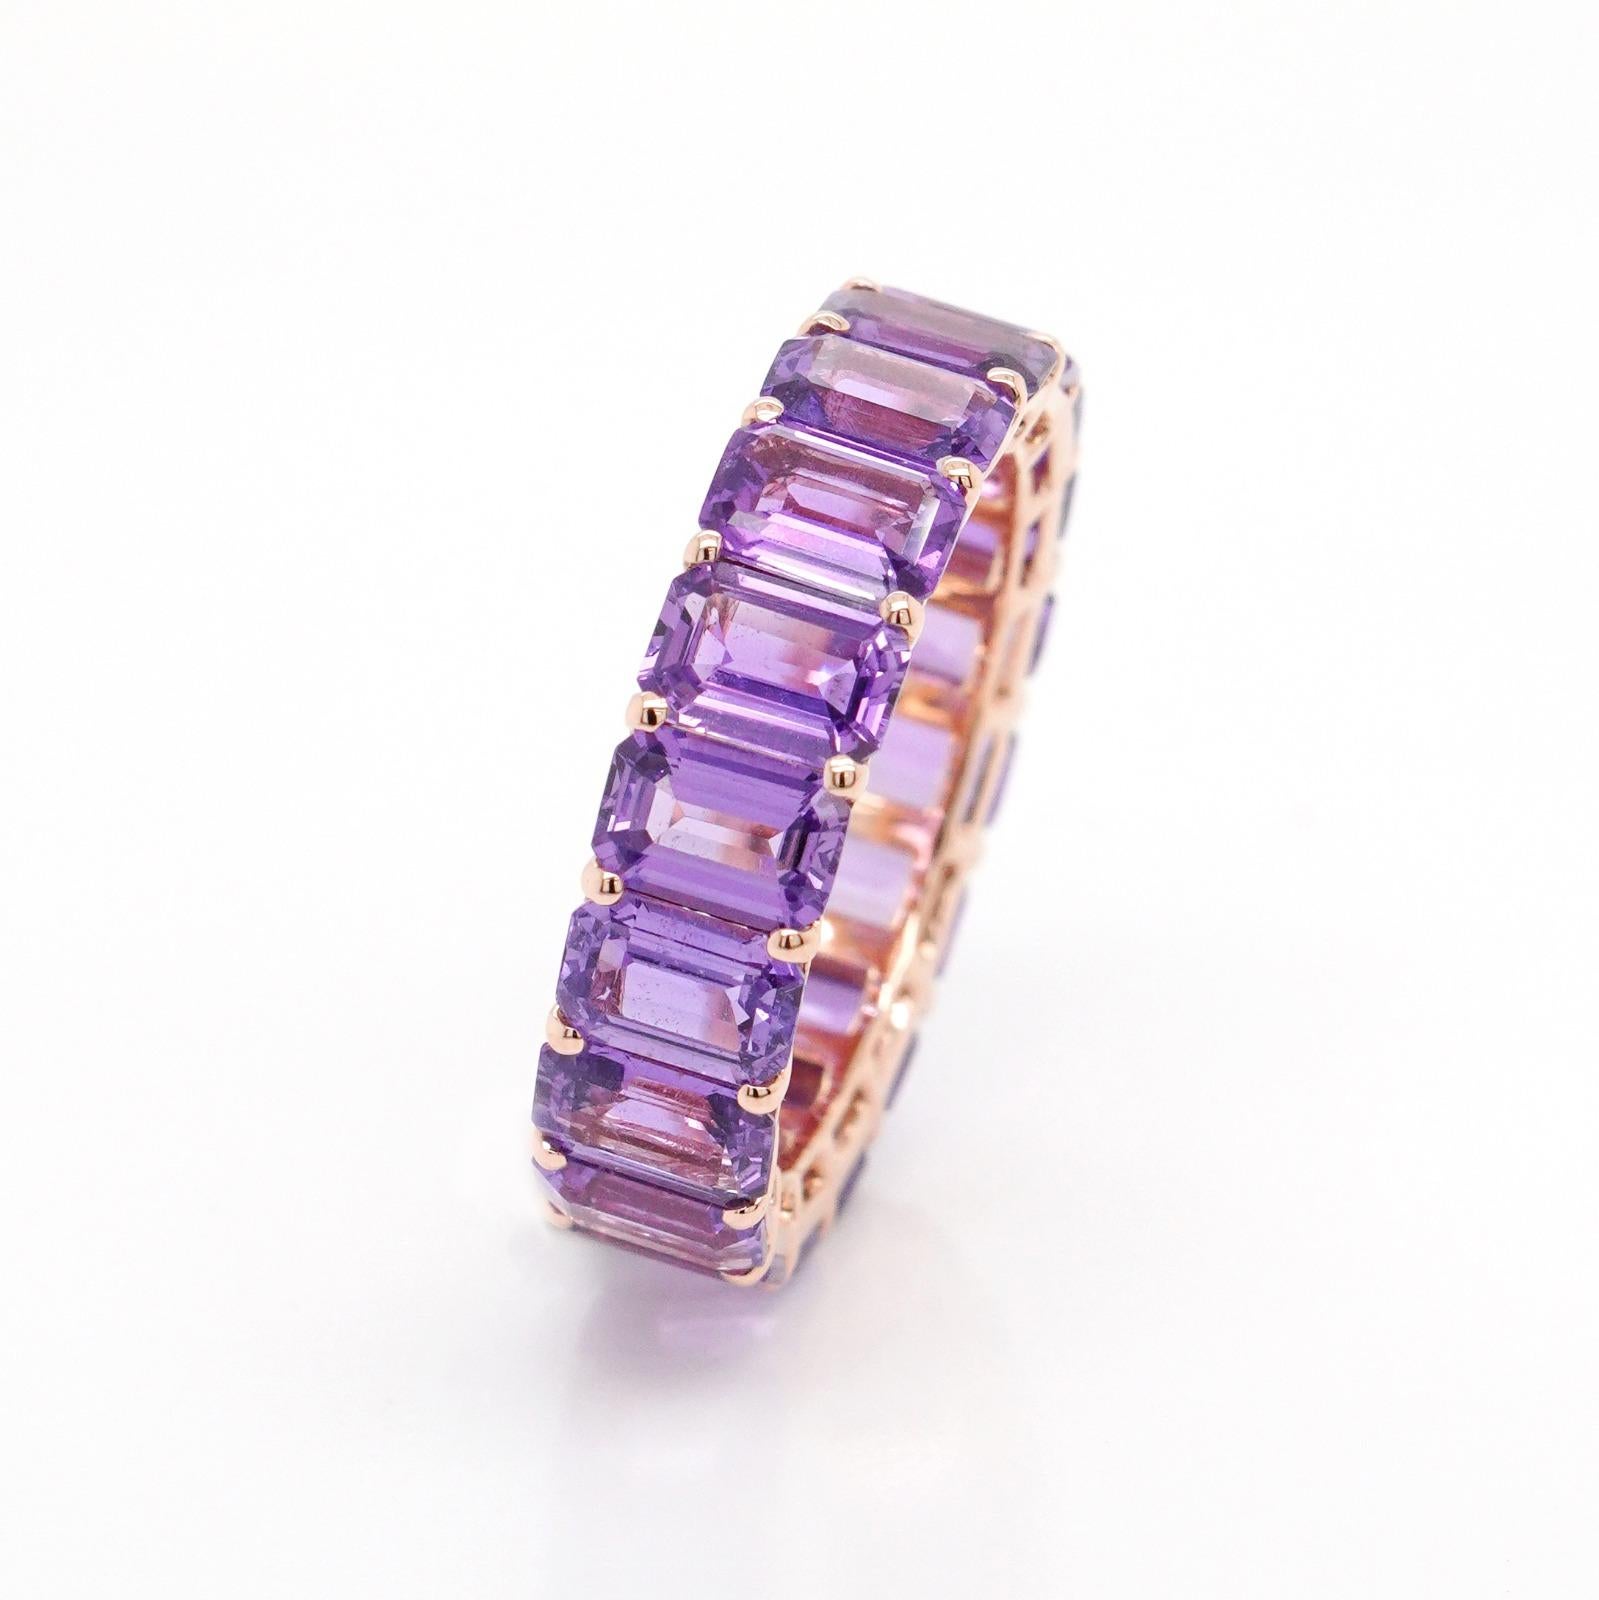 18K rose gold with natural fancy sapphire 12.48 carat 6.13 grams